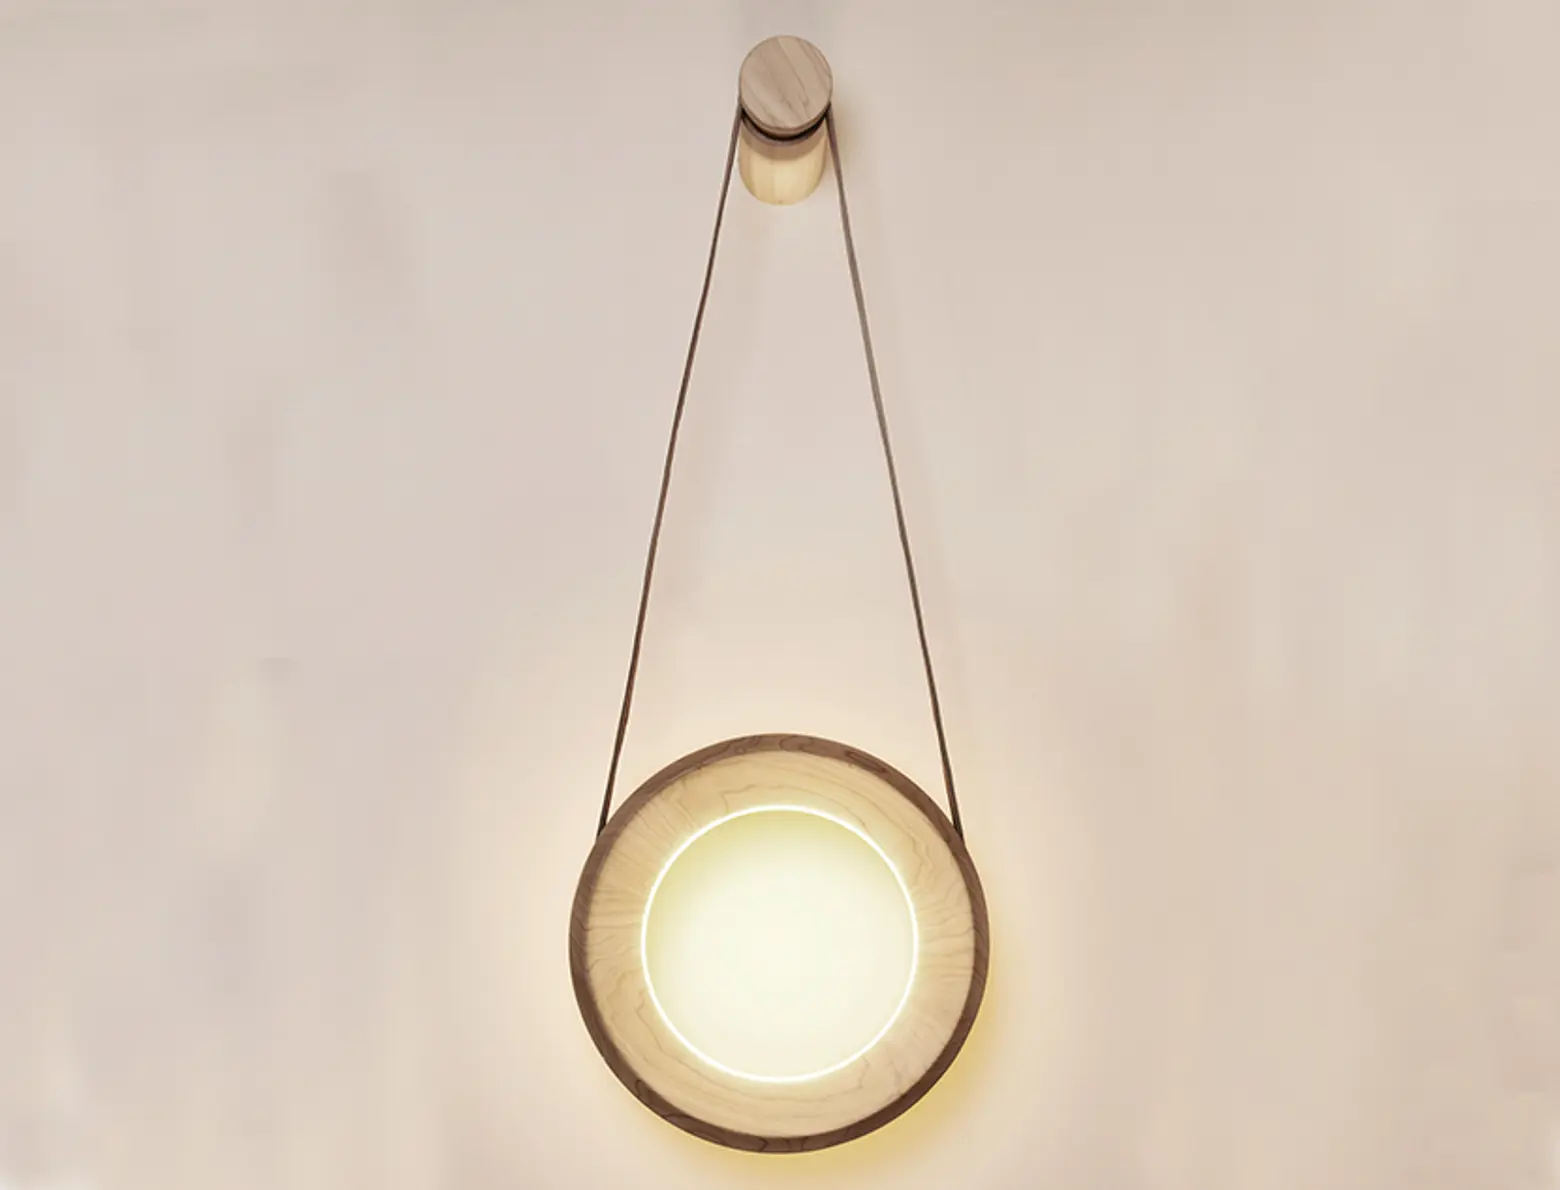 Sensual HALO Lamp Waits for a Gentle Human Touch to Turn On